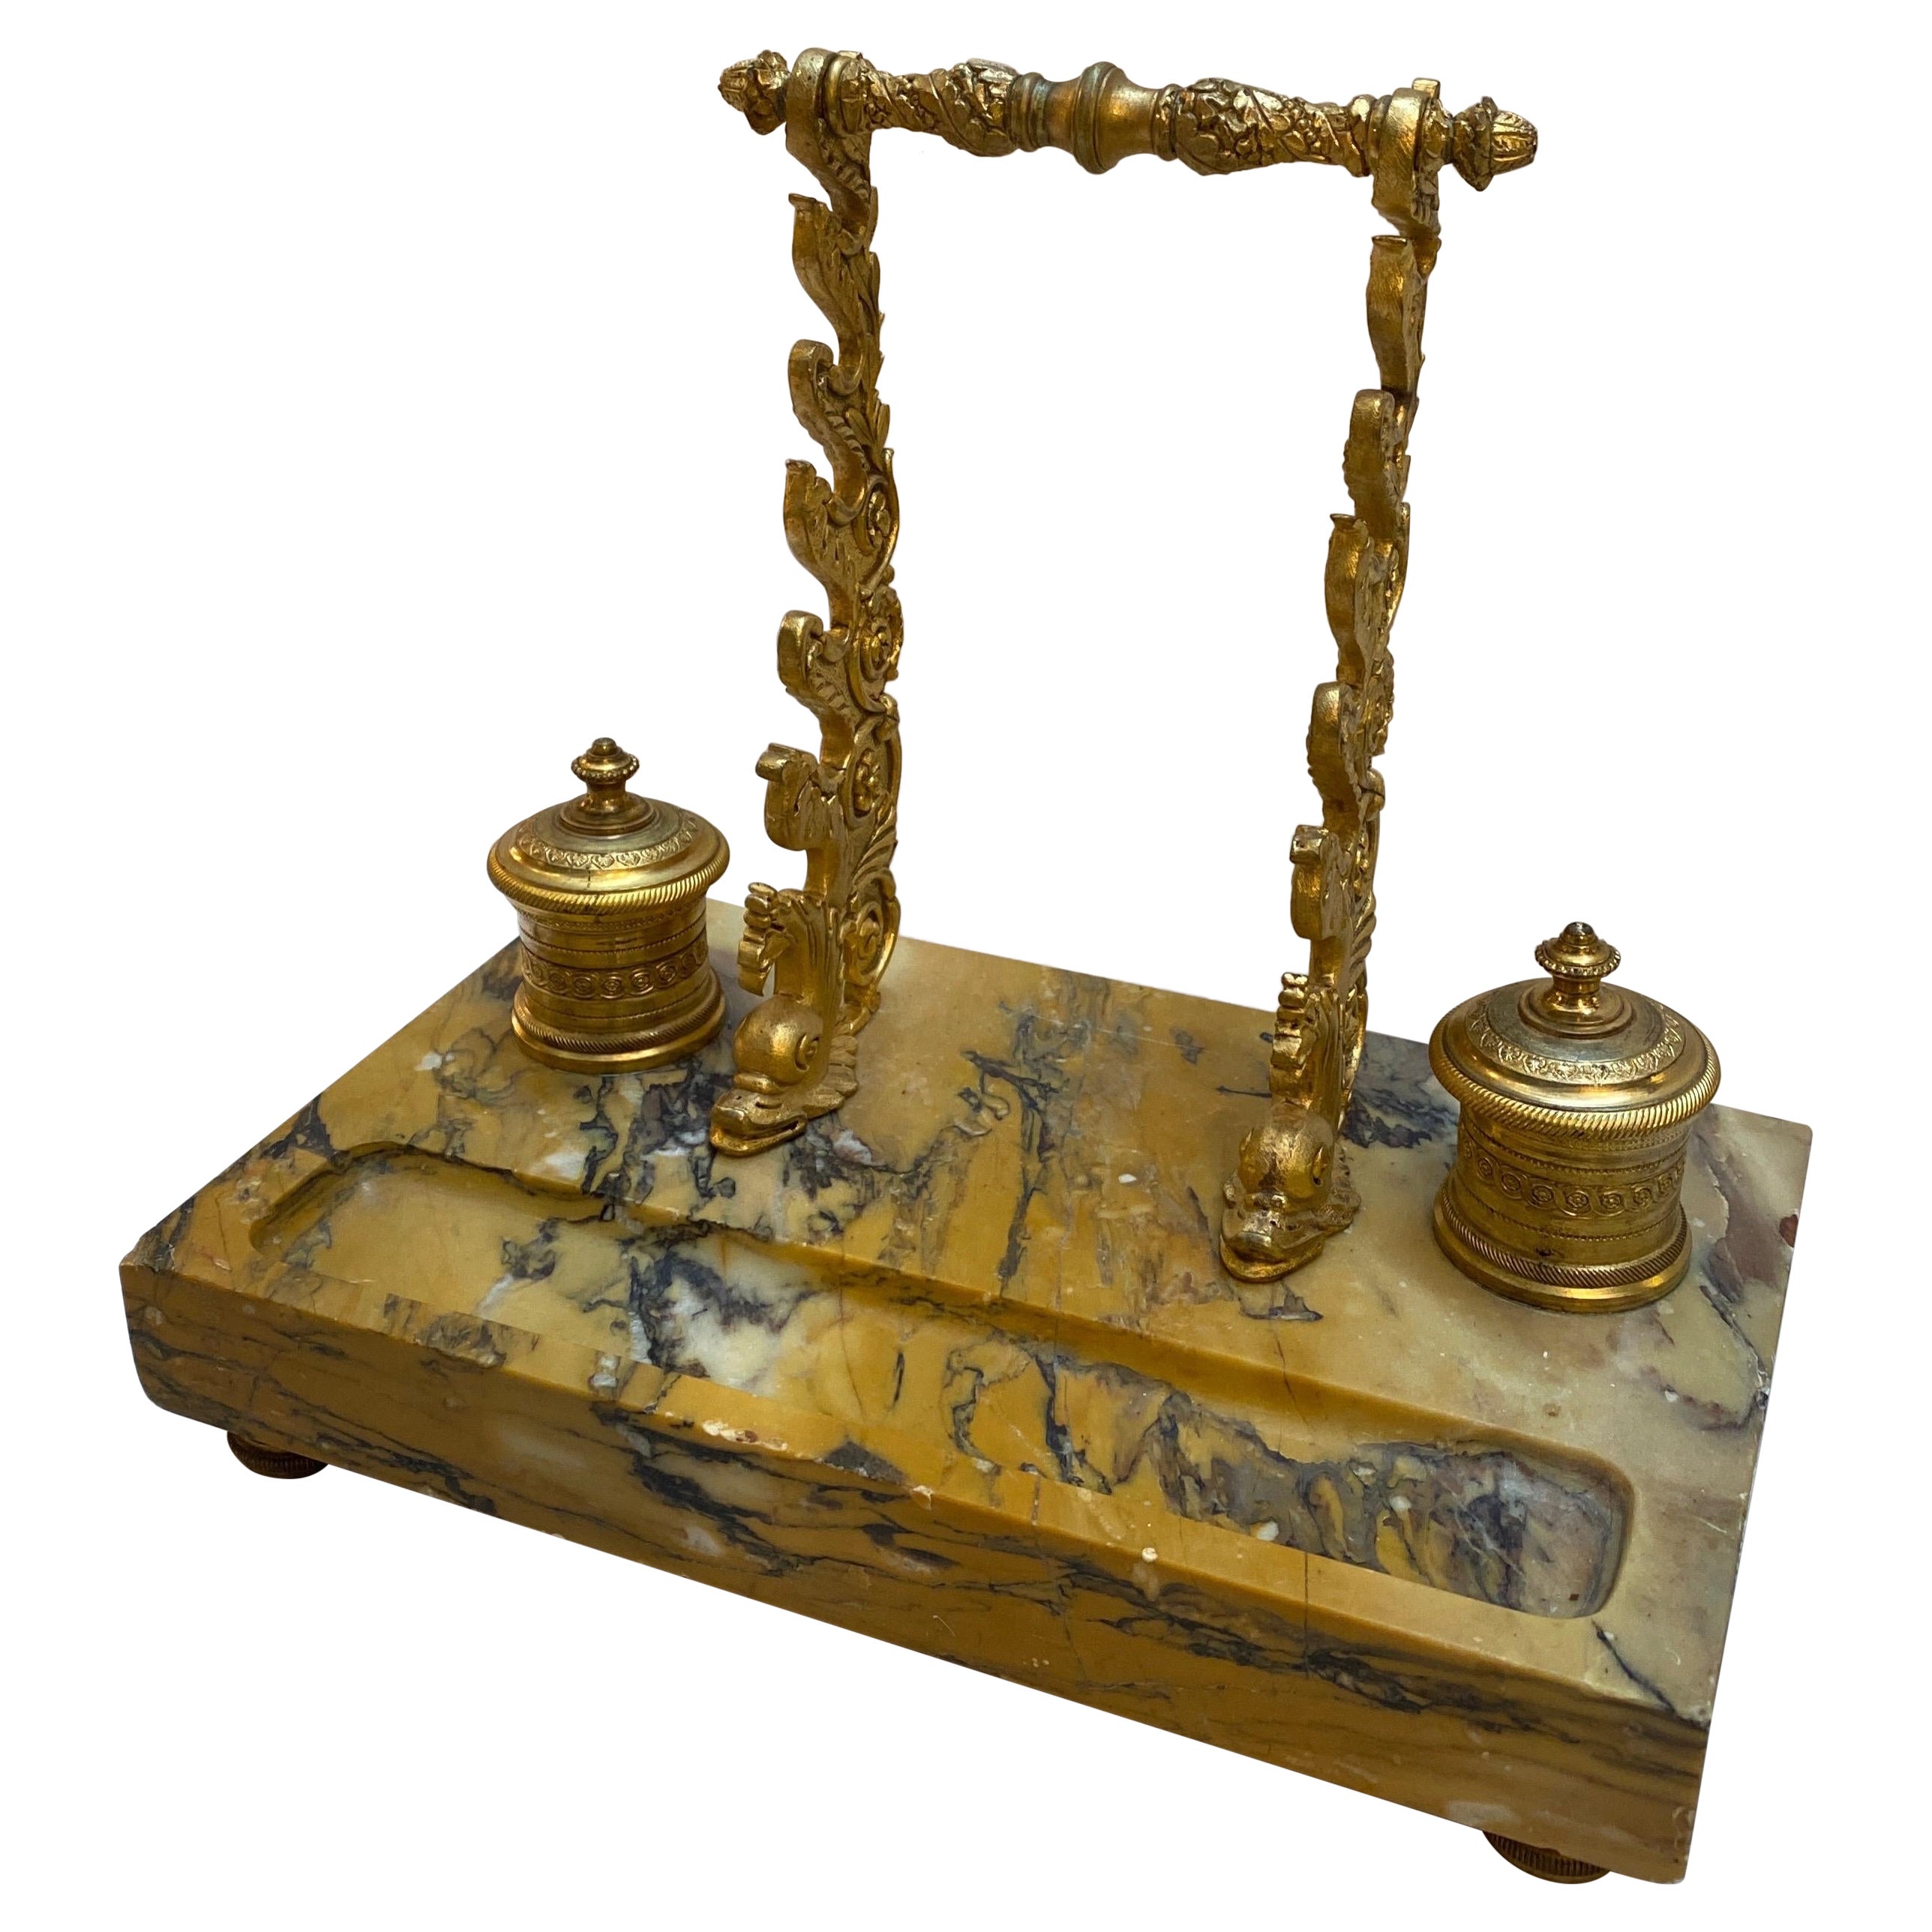 Siena Marble and Ormolu Double Inkstand Late 19th Century